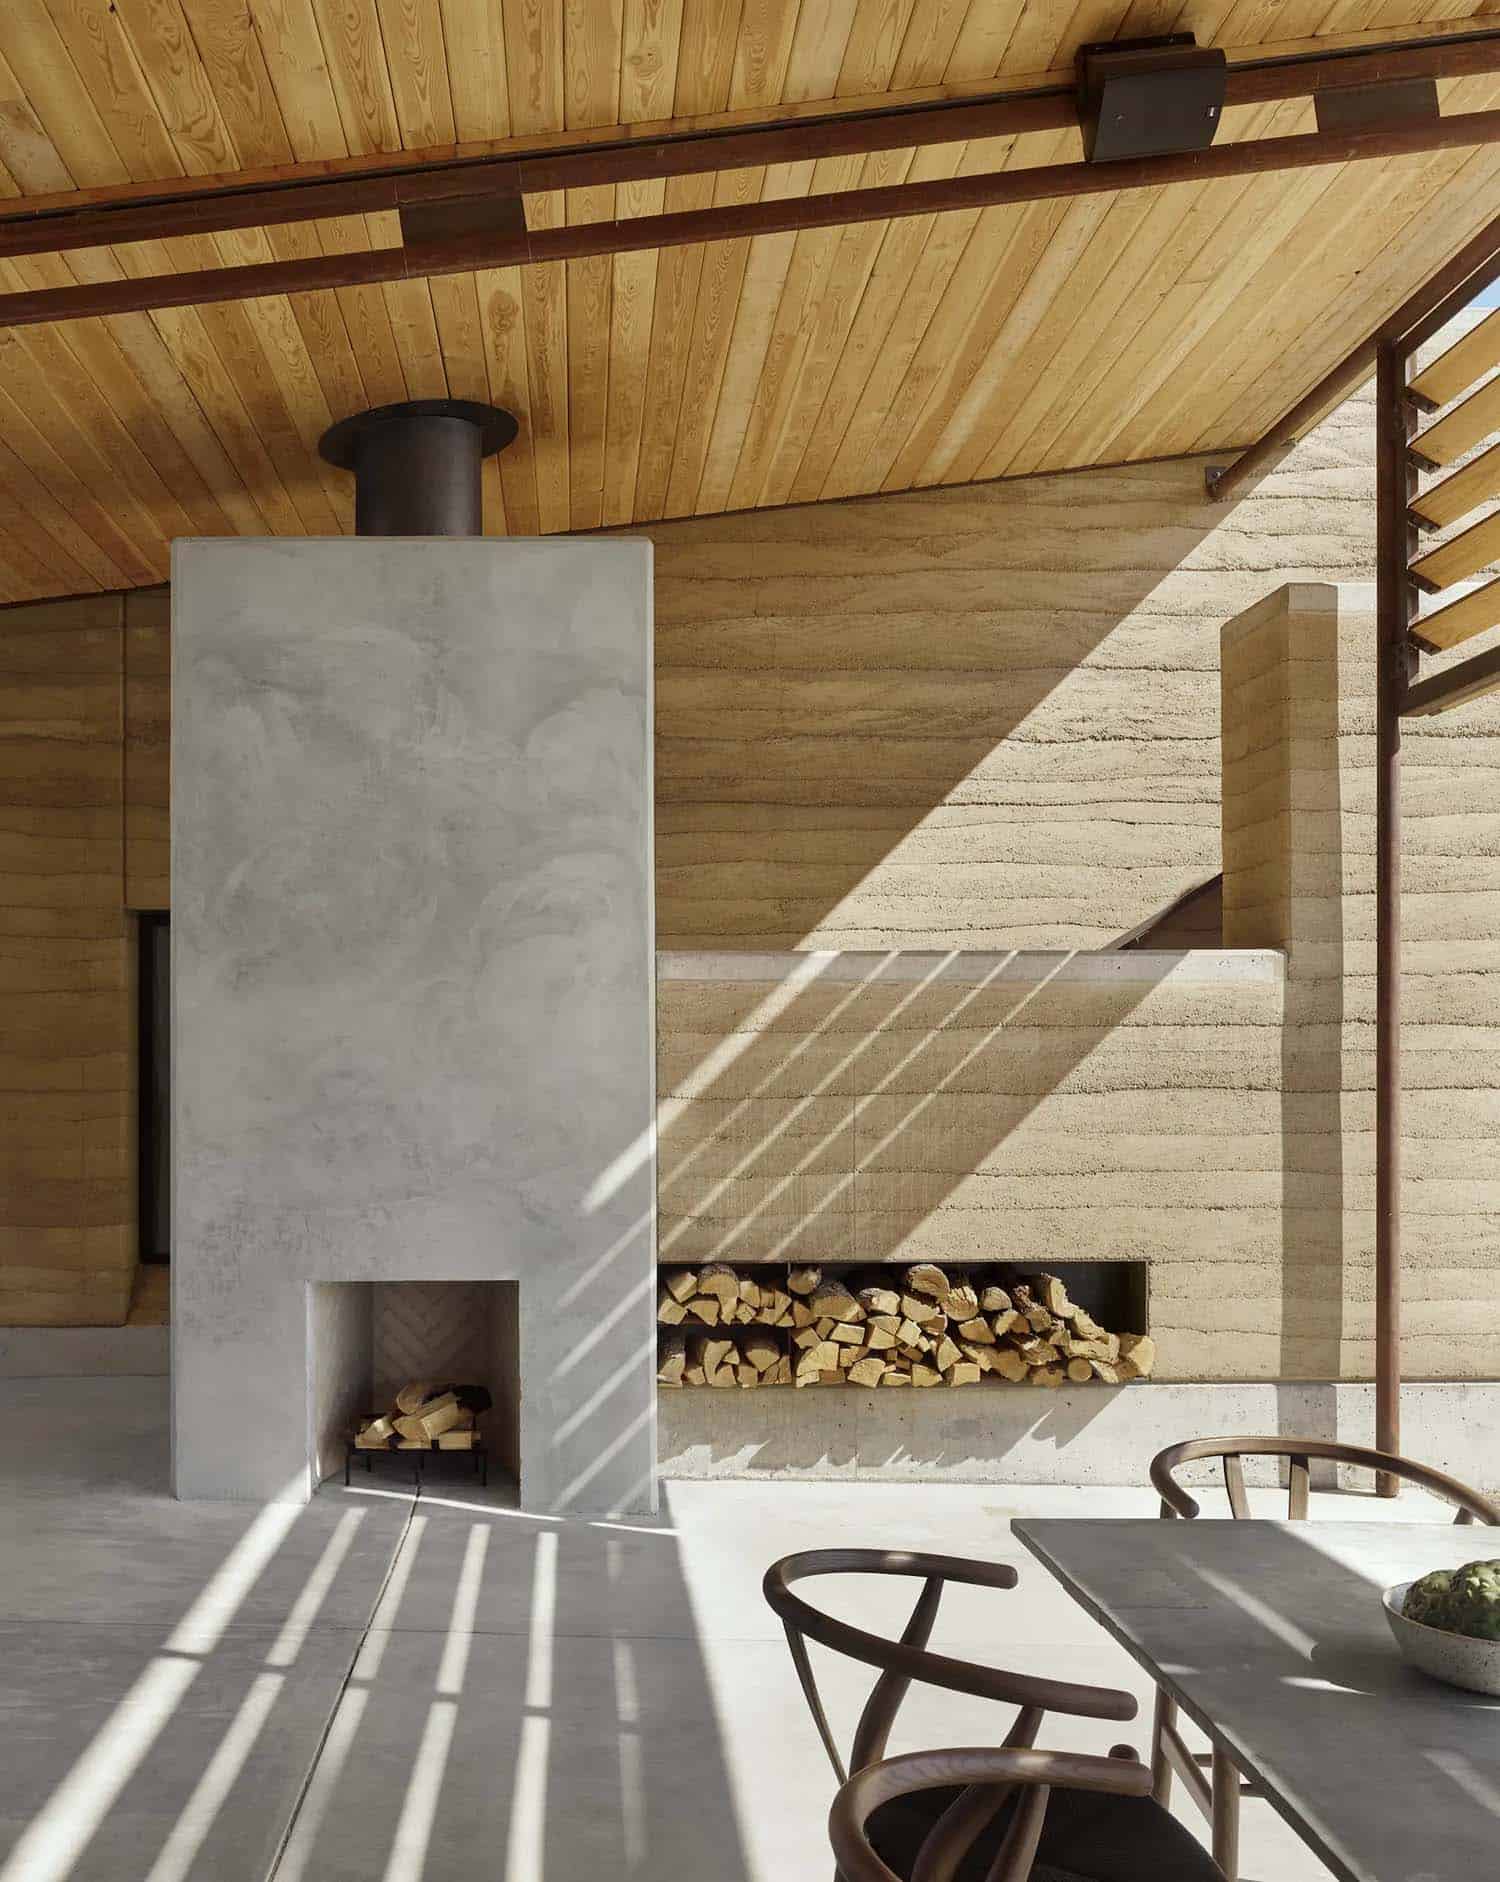 rammed earth ranch house with an outdoor porch and fireplace